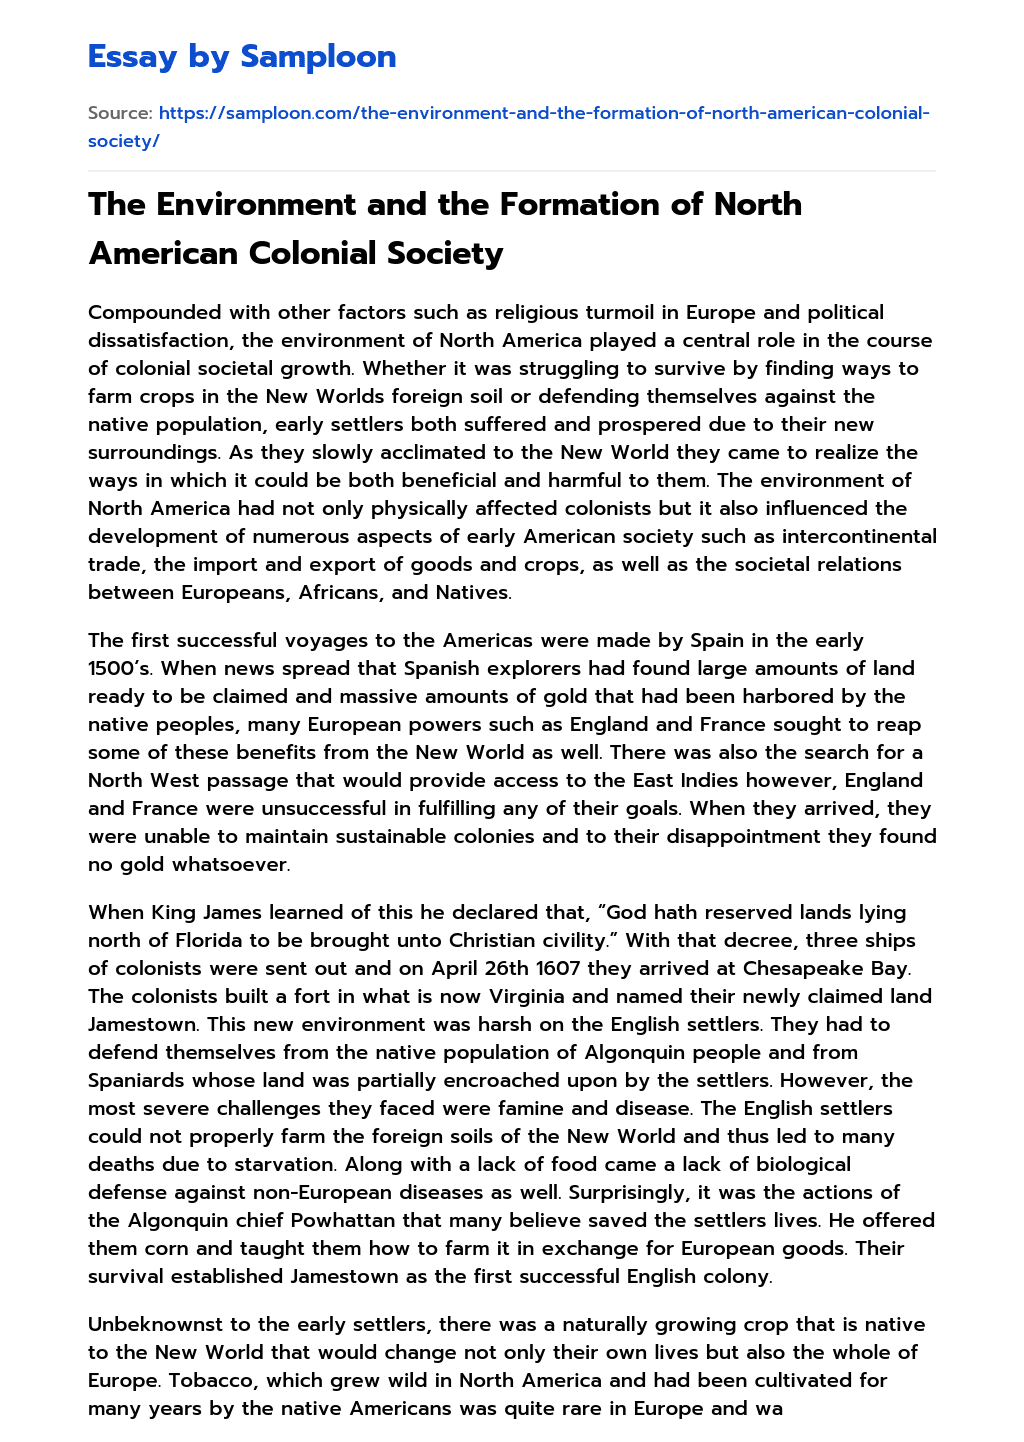 The Environment and the Formation of North American Colonial Society essay